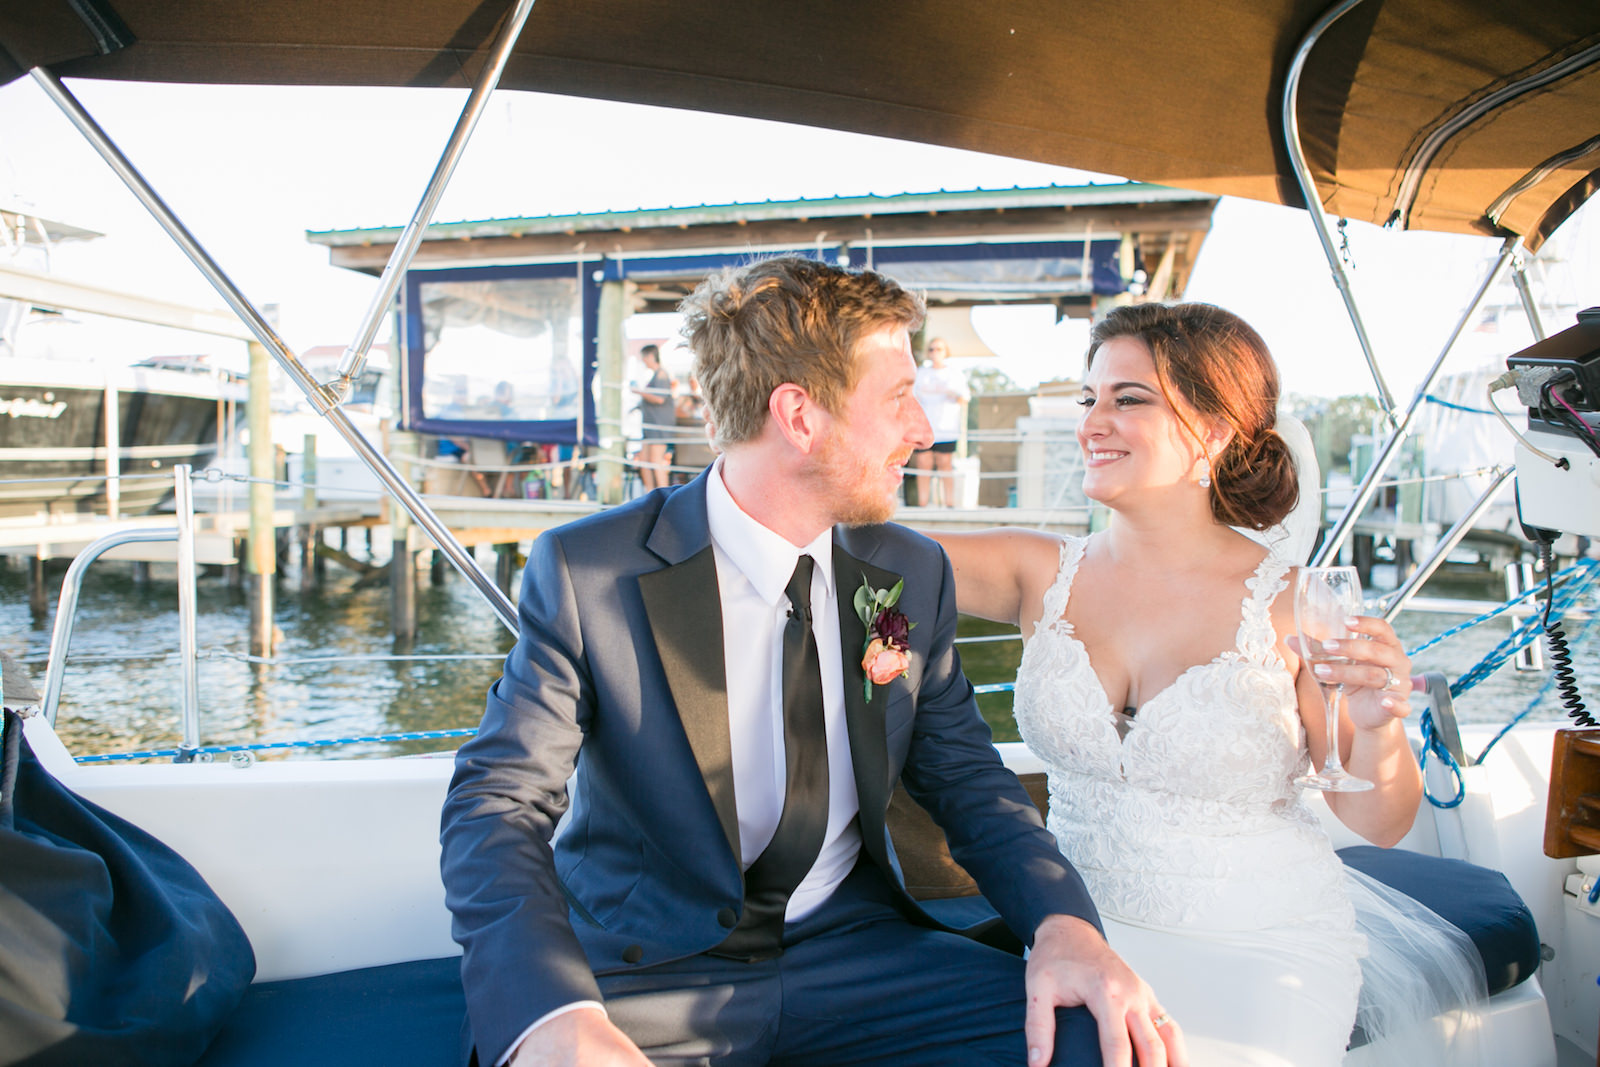 Florida Bride and Groom Sitting on Boat Wedding Portrait | Tampa Bay Wedding Photographer Carrie Wildes Photography